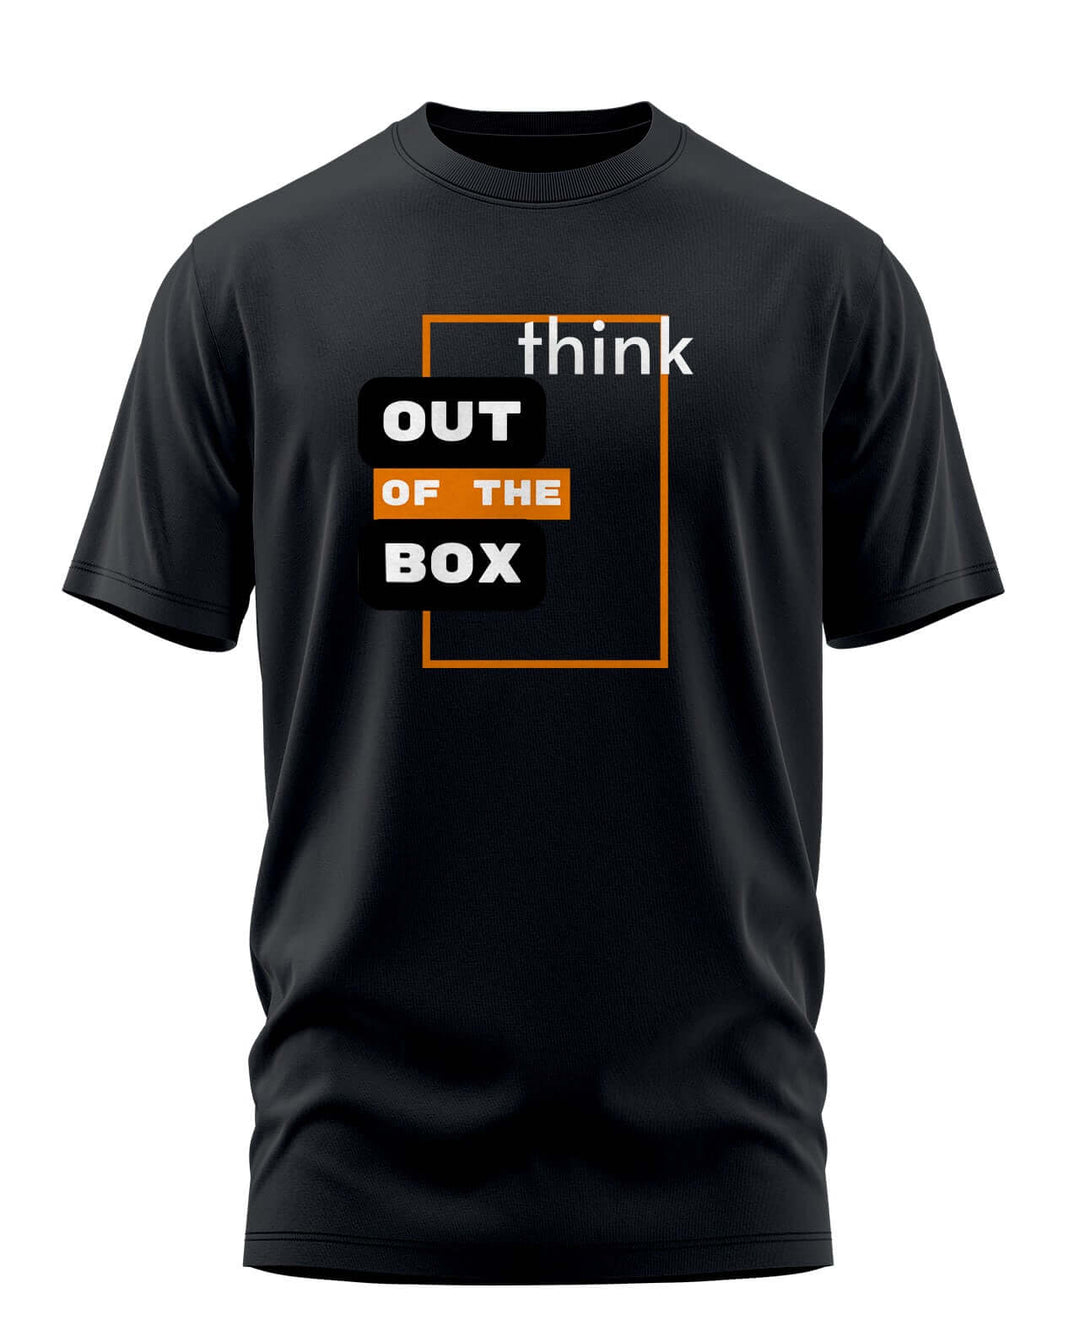 Think out of the box T-shirt